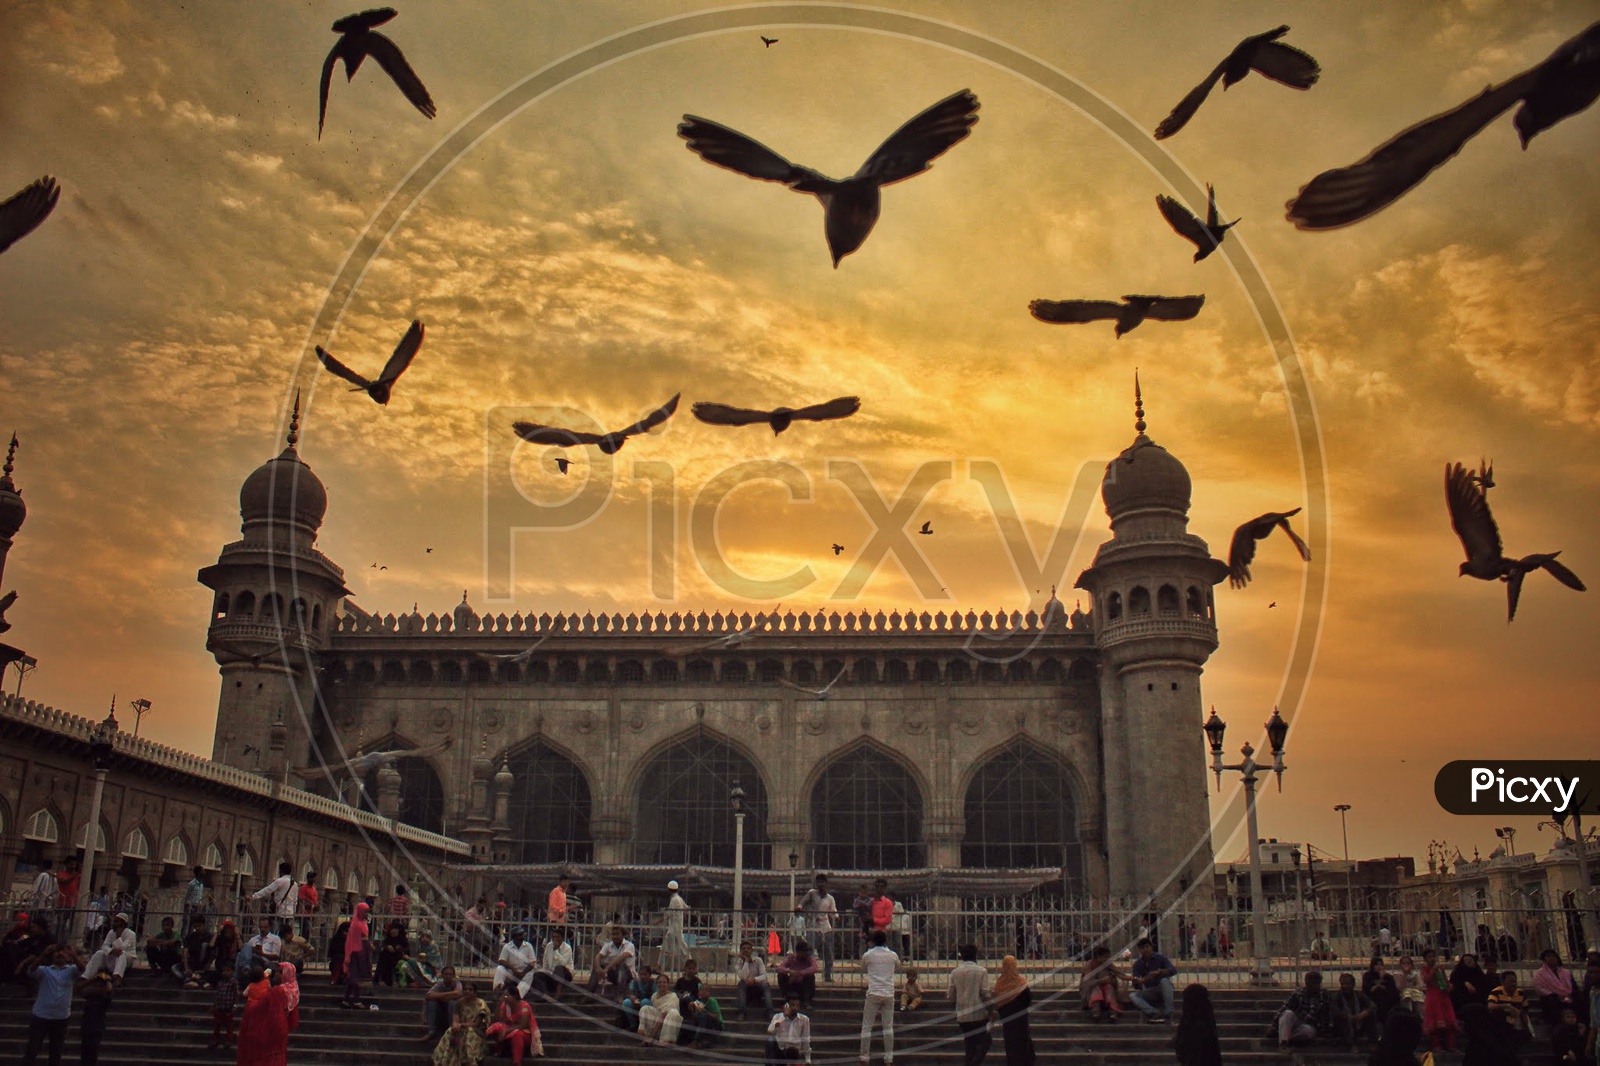 Mecca masjid during golden hour.